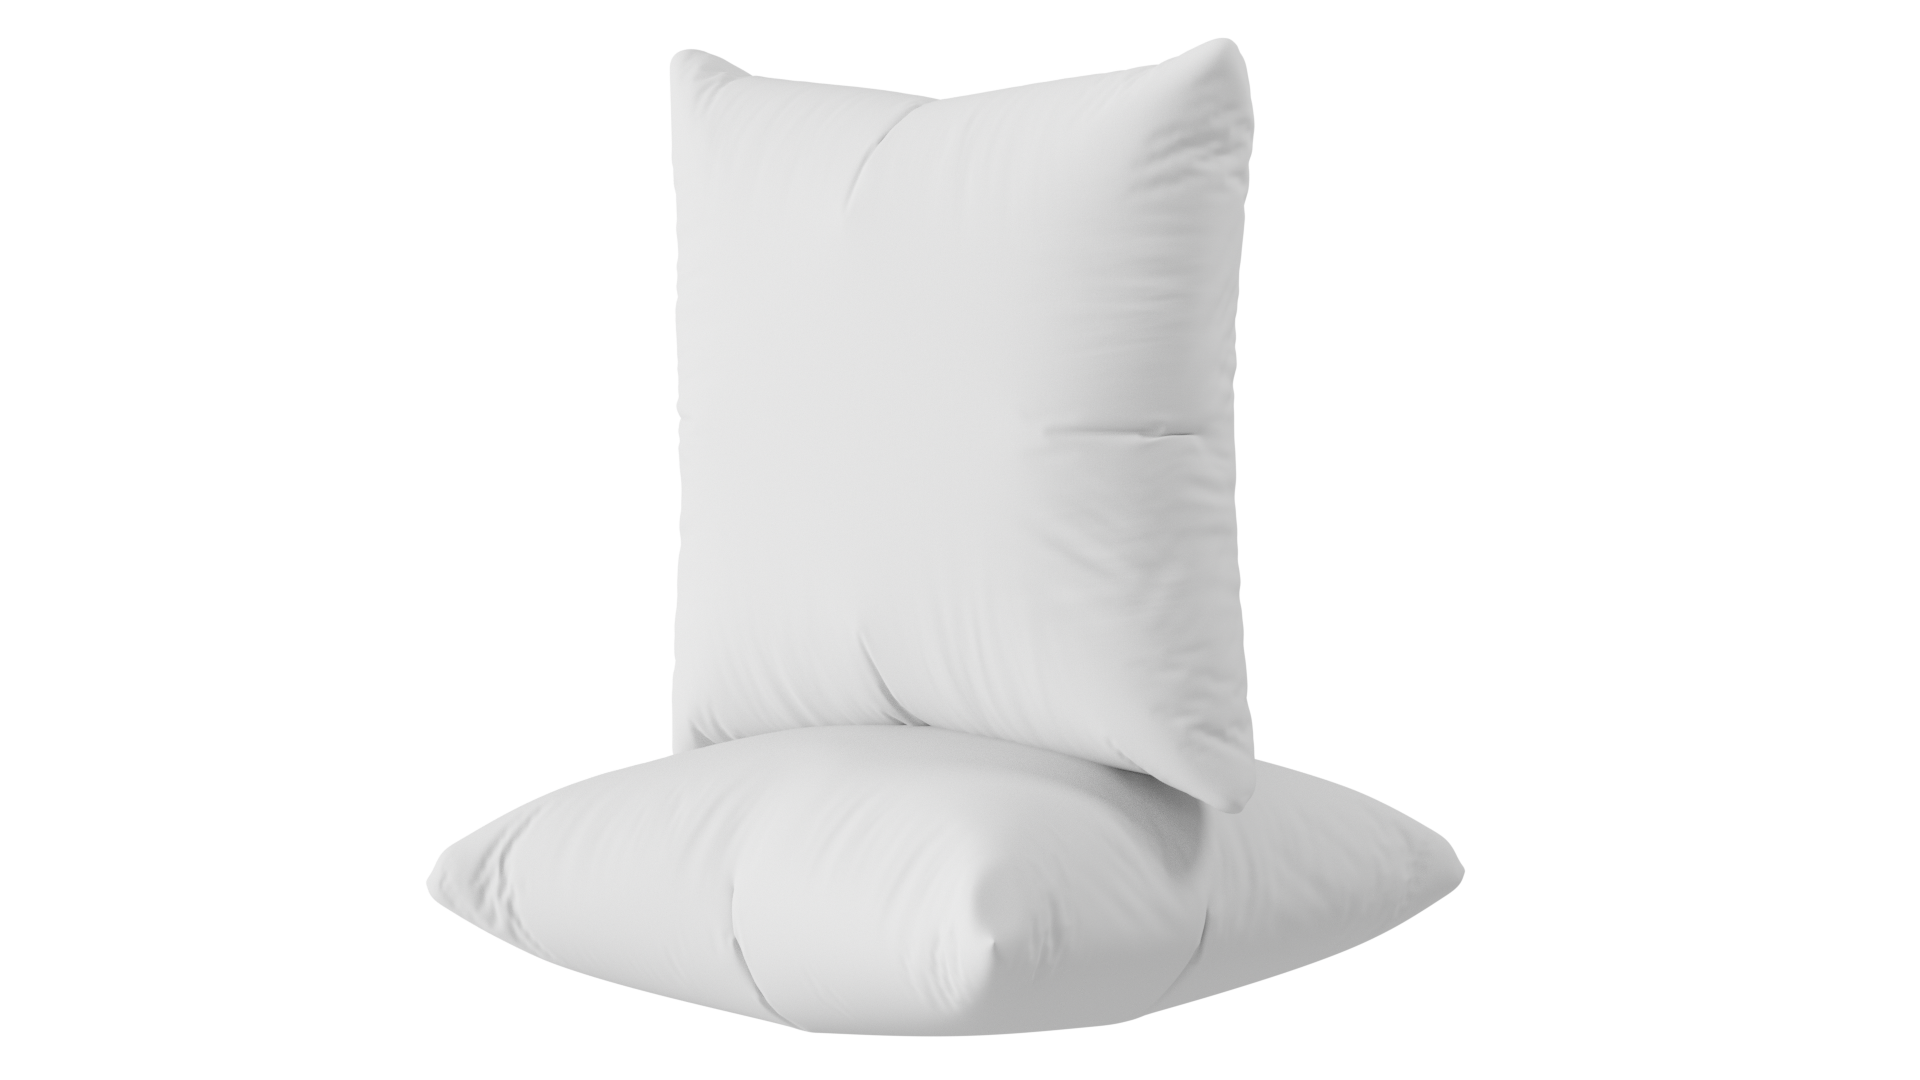 Utopia Bedding Throw Pillows Insert (Pack of 2, White) - 26 x 26 Inches Bed  and Couch Pillows - Indoor Decorative Pillows : Home & Kitchen 